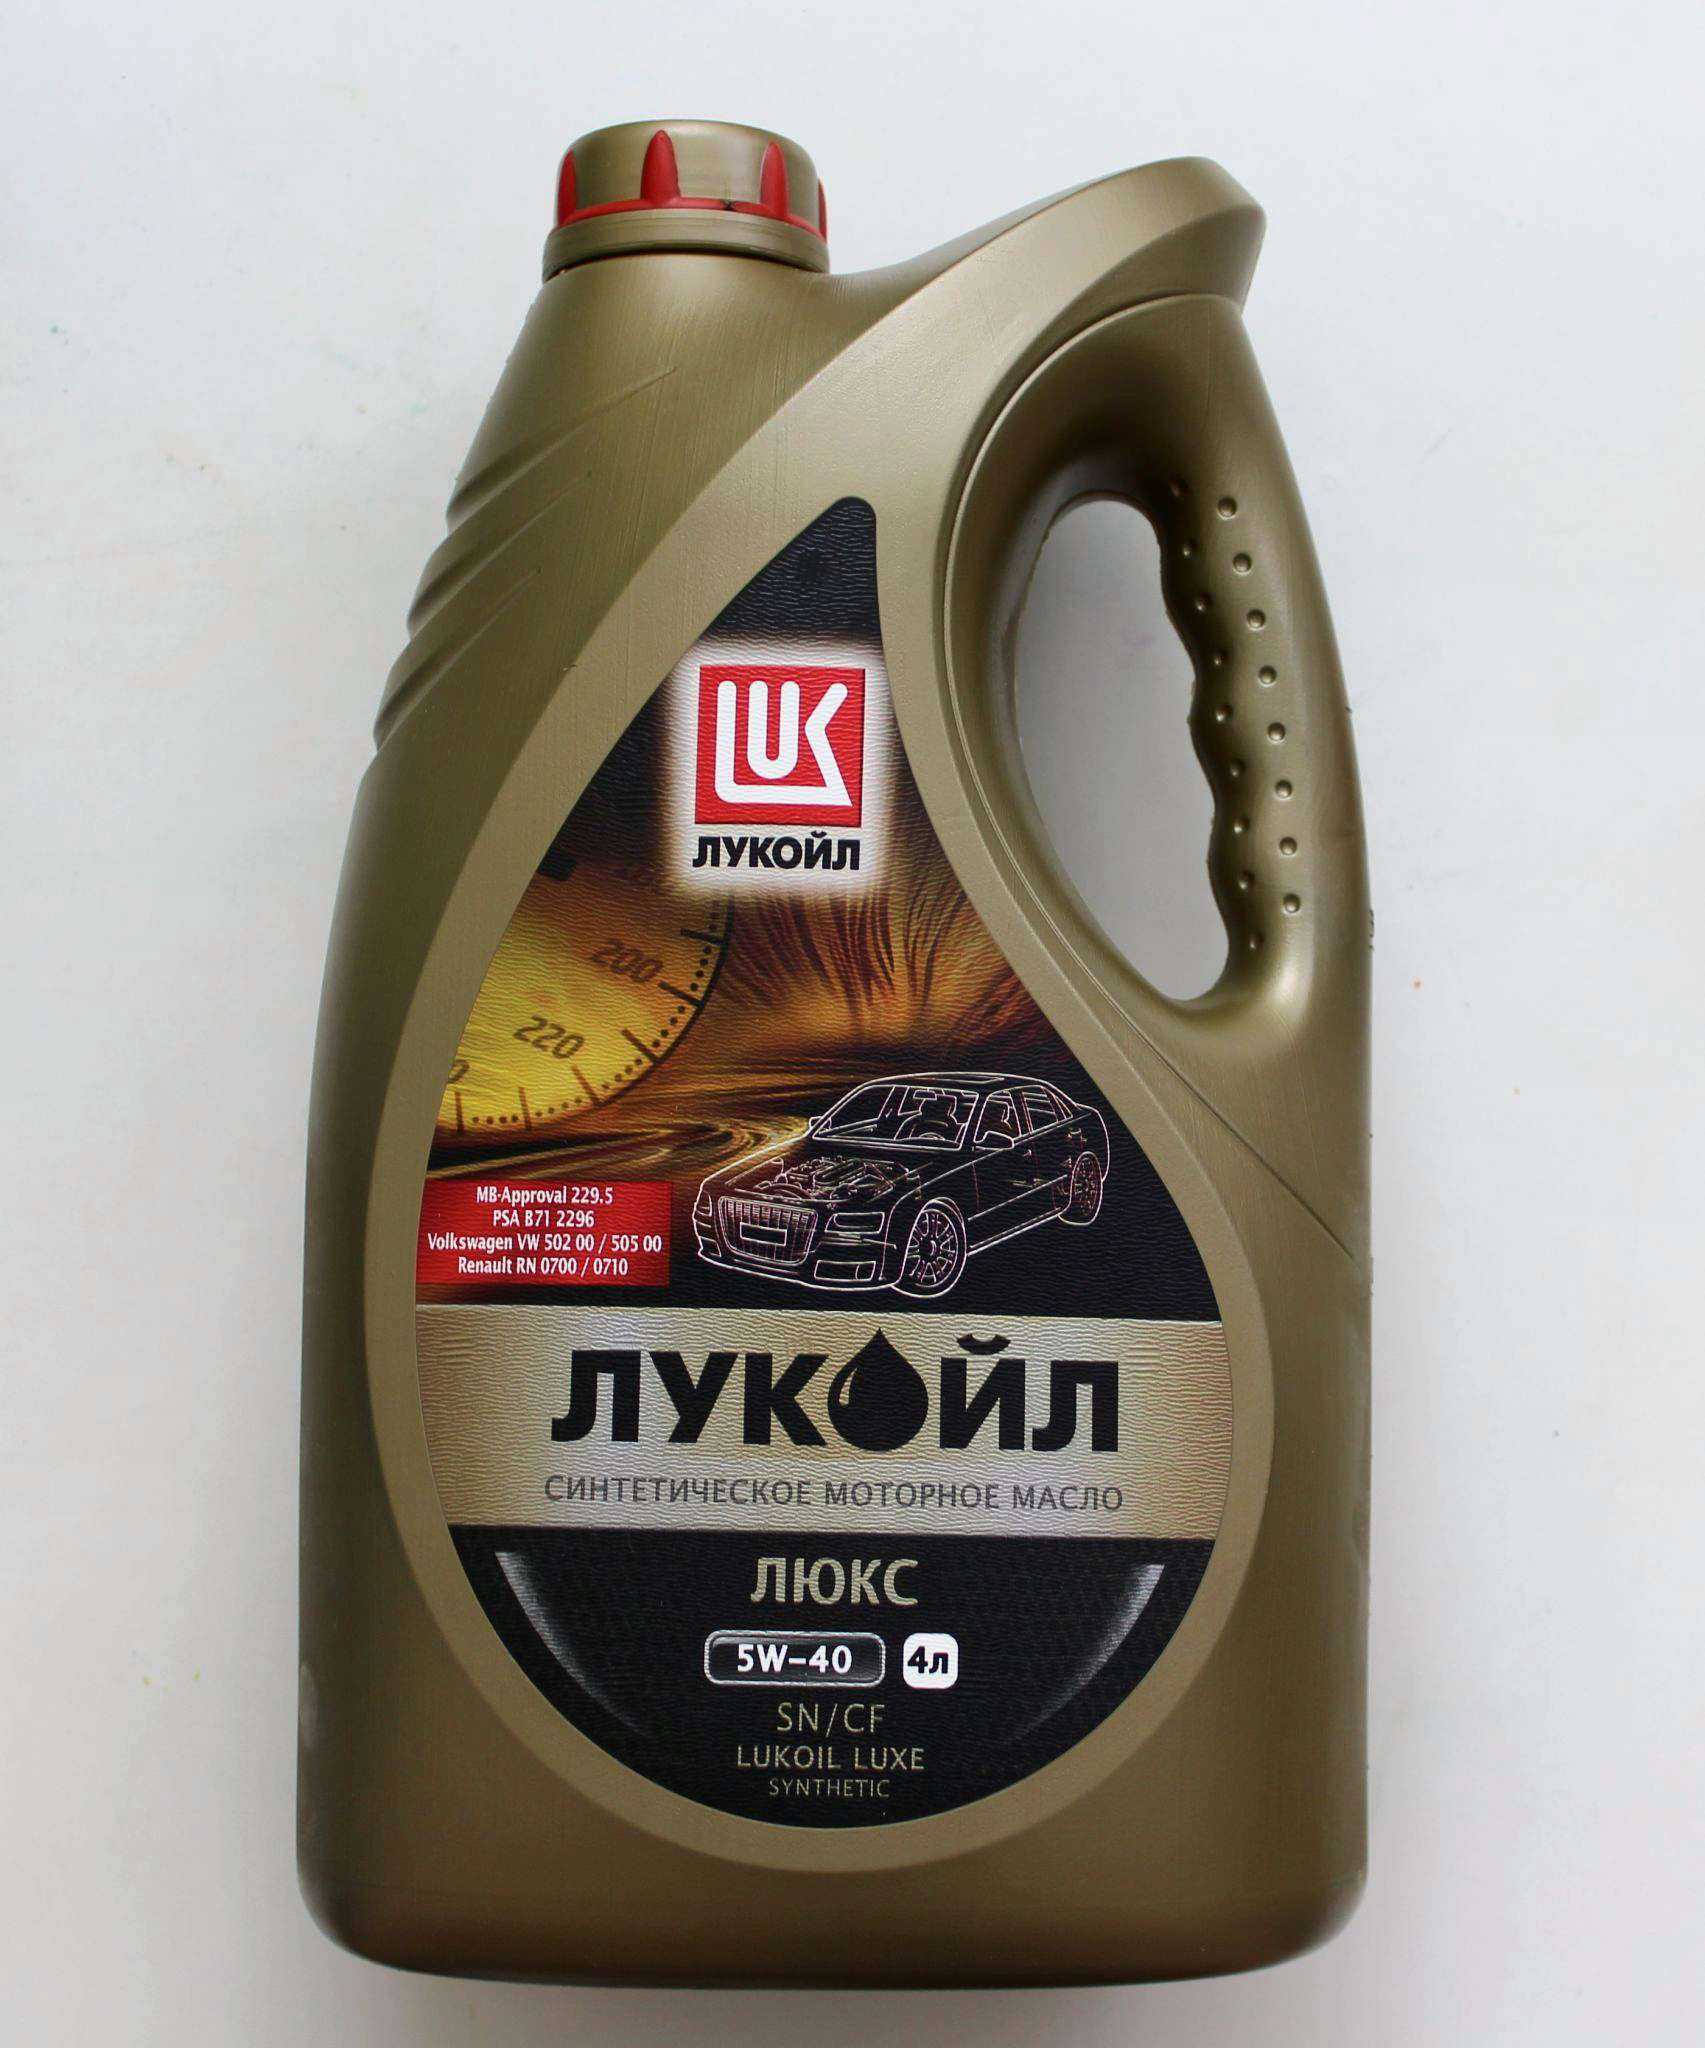 Масло лукойл 5w40 sn cf. Лукойл Люкс 5w40 SN/CF. Масло Лукойл 5w40 синтетика. Лукойл Люкс 5w40 SN/CF 4л. Лукойл Luxe 5w-40.